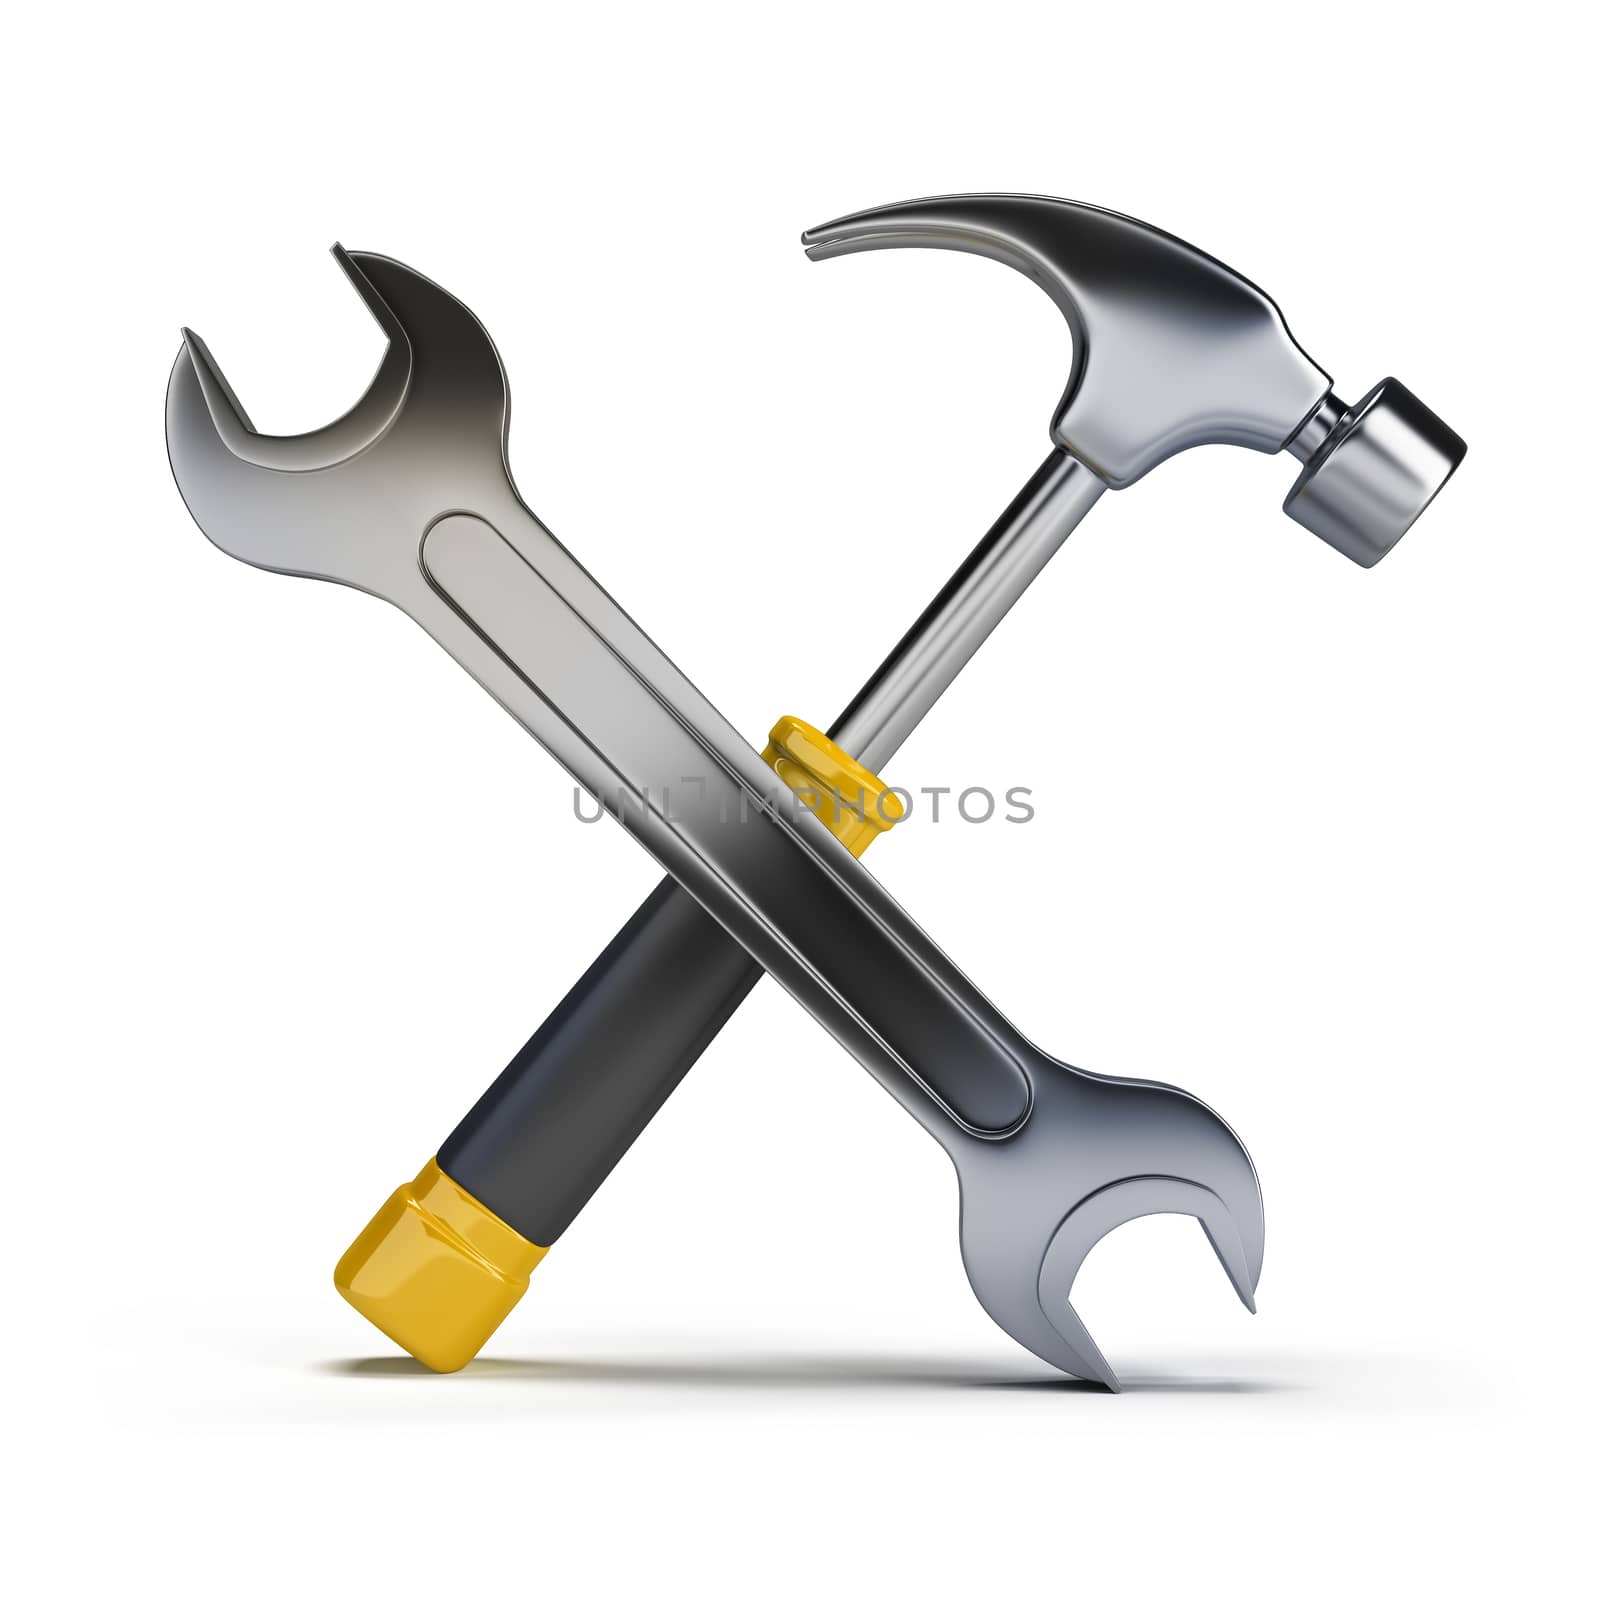 3d image. Hammer and wrench. Isolated white background.